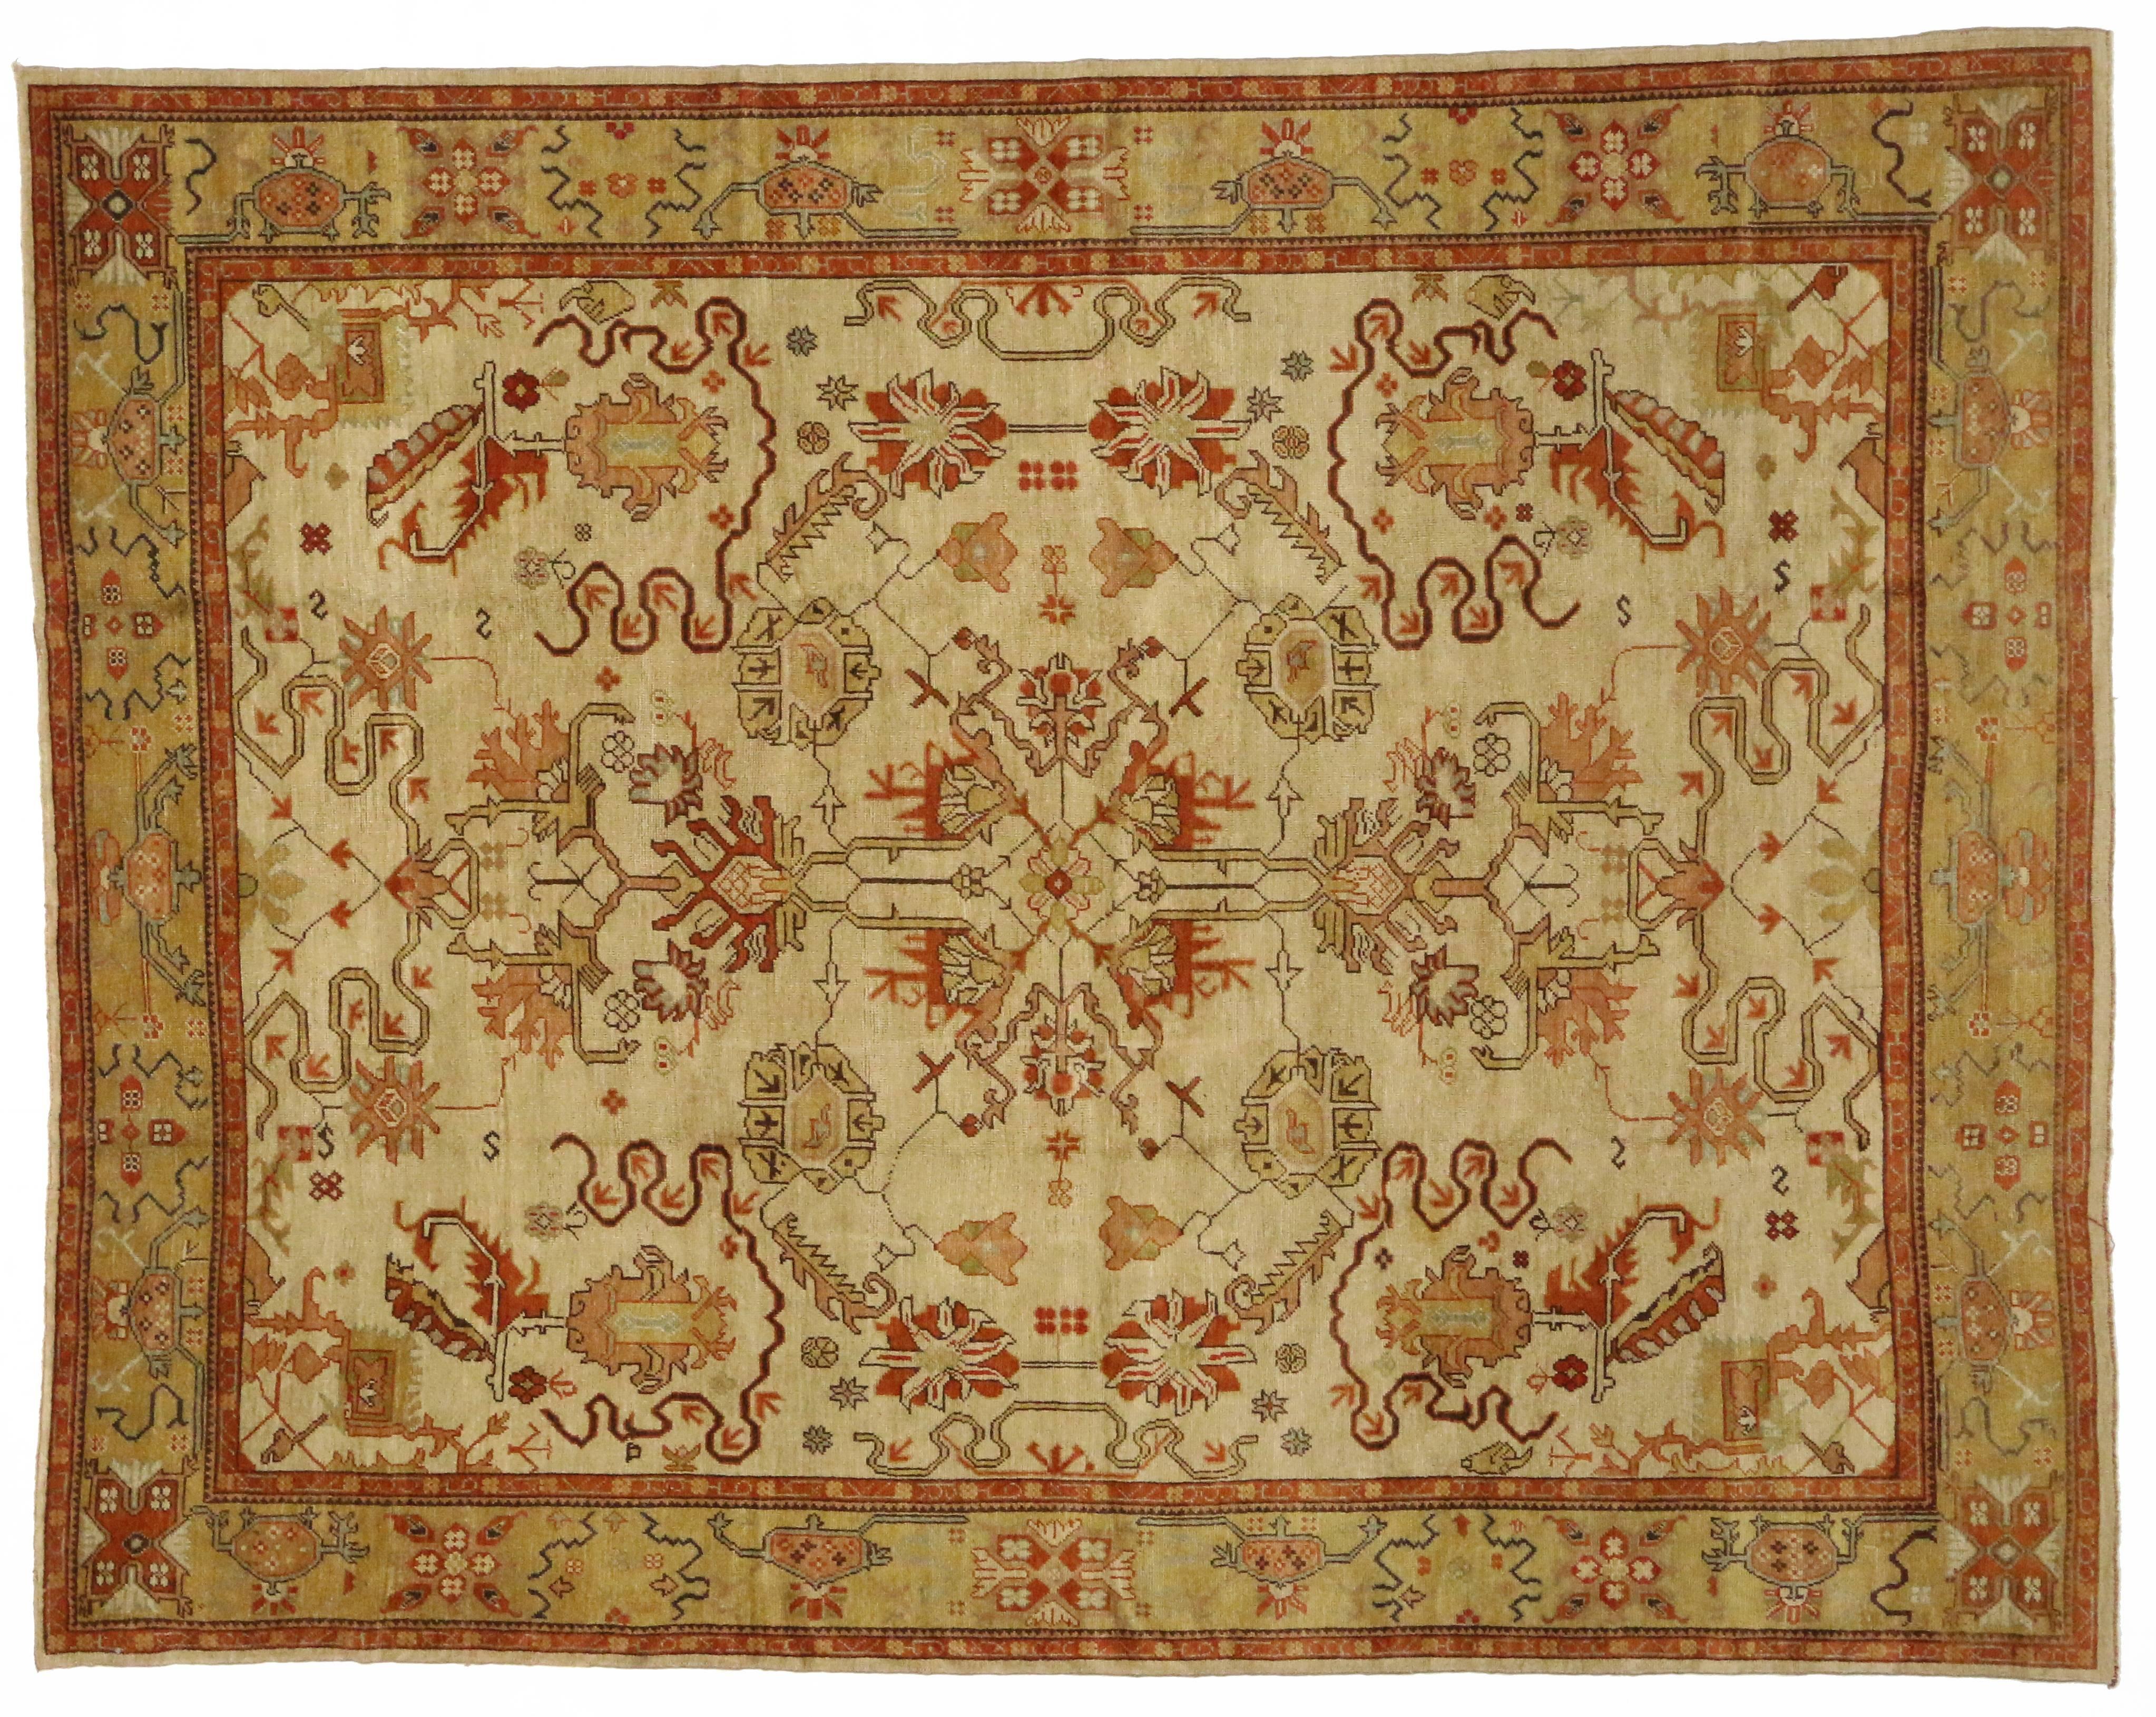 74067 New Modern Turkish Oushak Rug with Traditional Style and Cloudband Design 10'00 x 12'02. With a spectacular twist on a traditional art form, this modern Turkish golden Oushak rug features a traditional style in warm colors. The overall